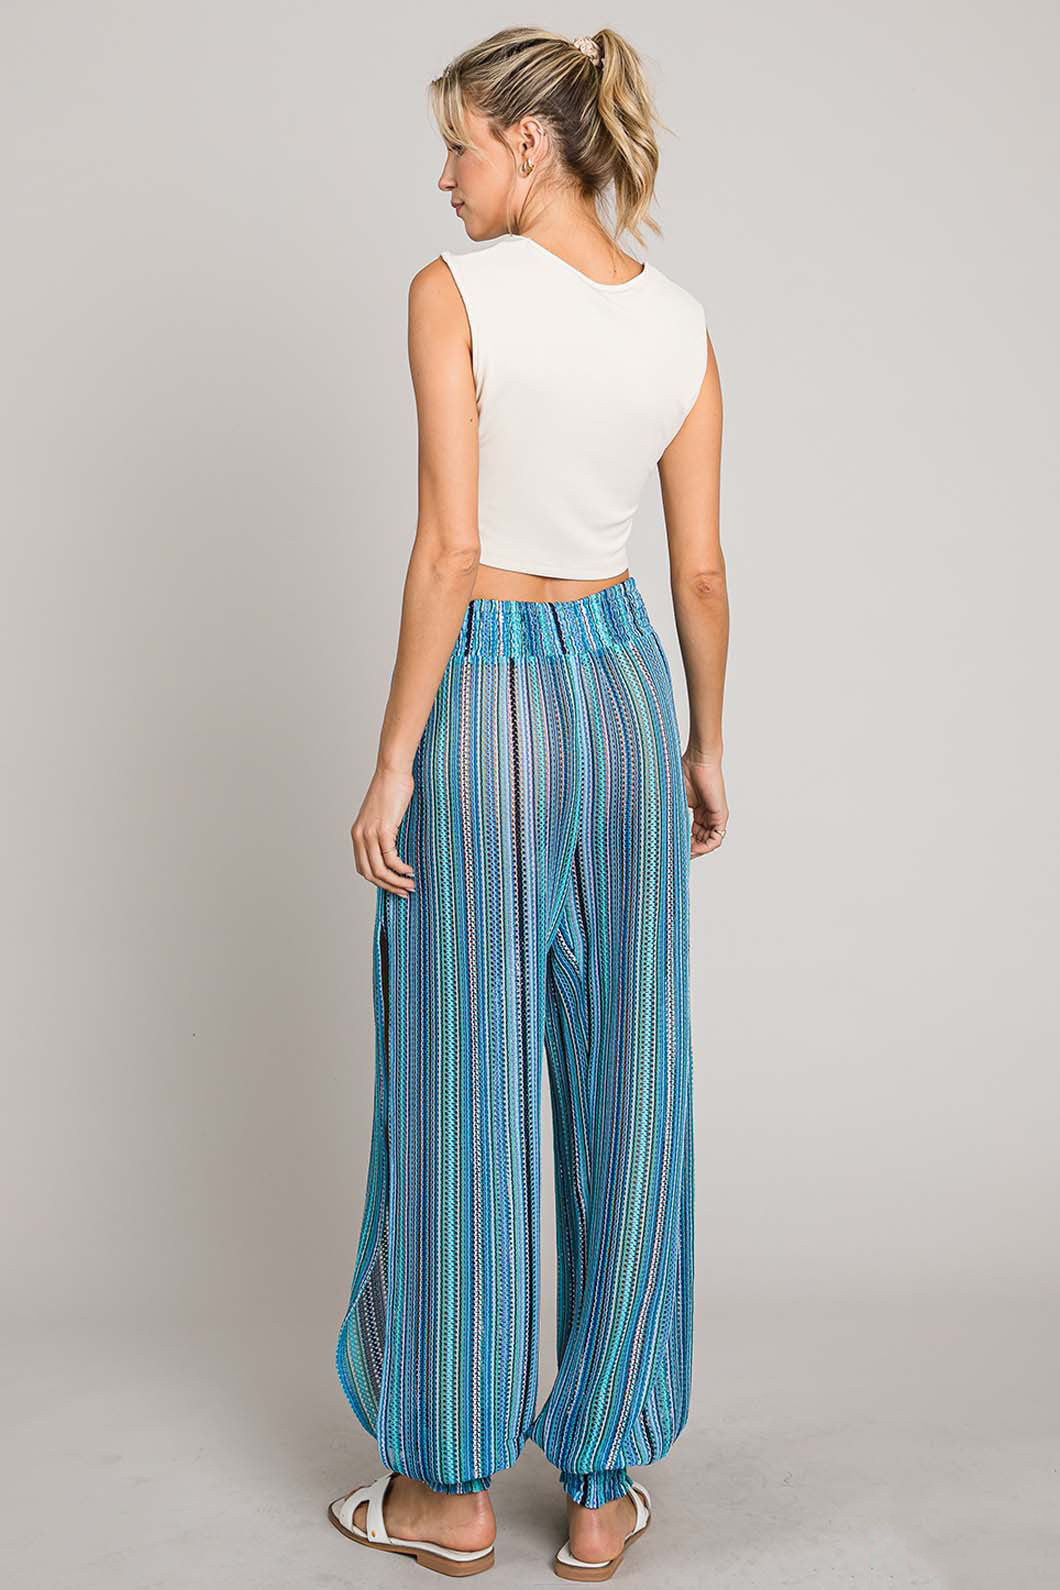 Genie Striped Smocked Cover Up Pants